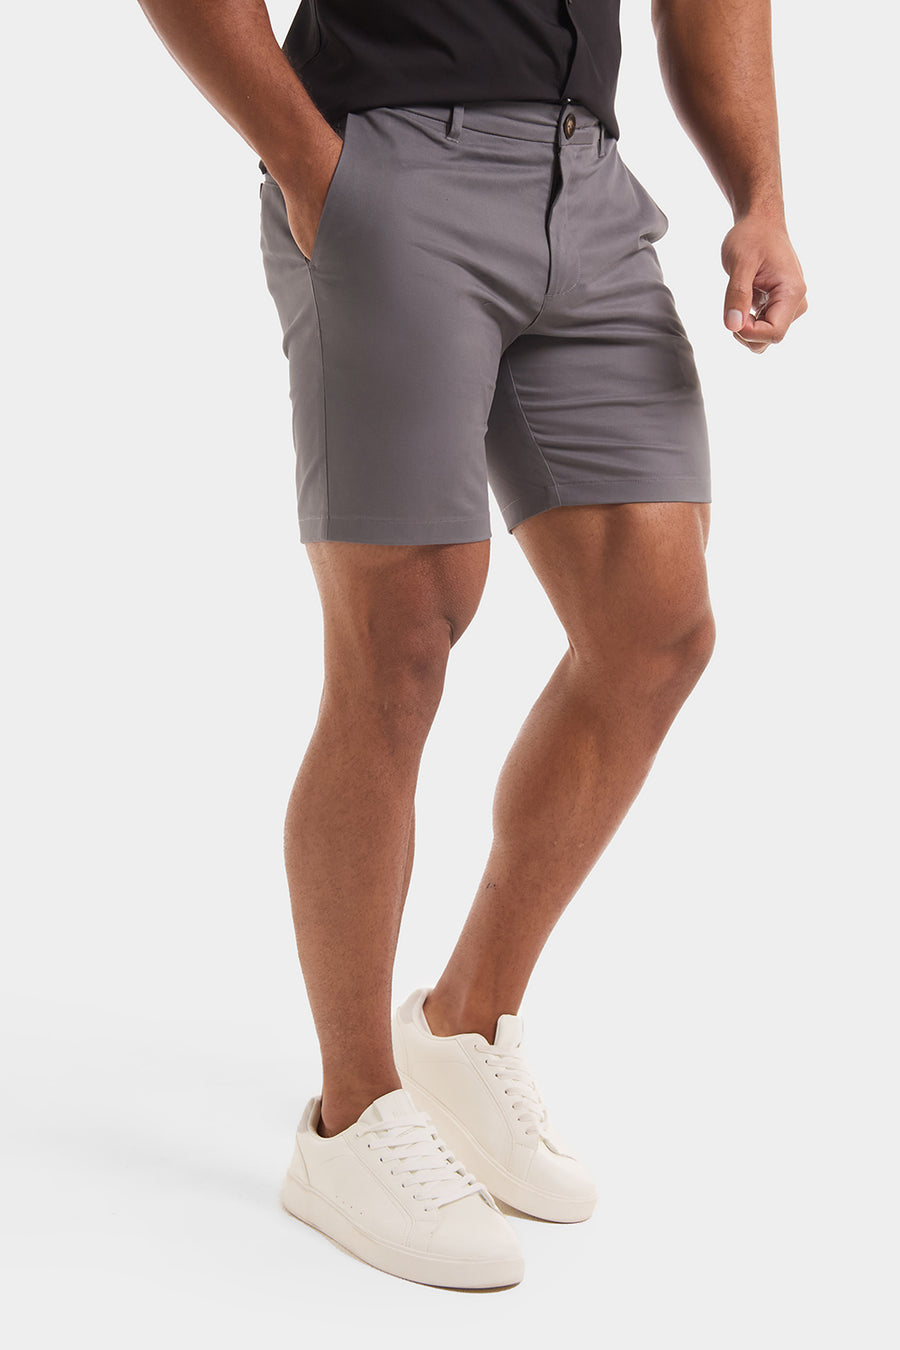 Athletic Fit Chino Shorts 7 in Pale Grey - TAILORED ATHLETE - USA